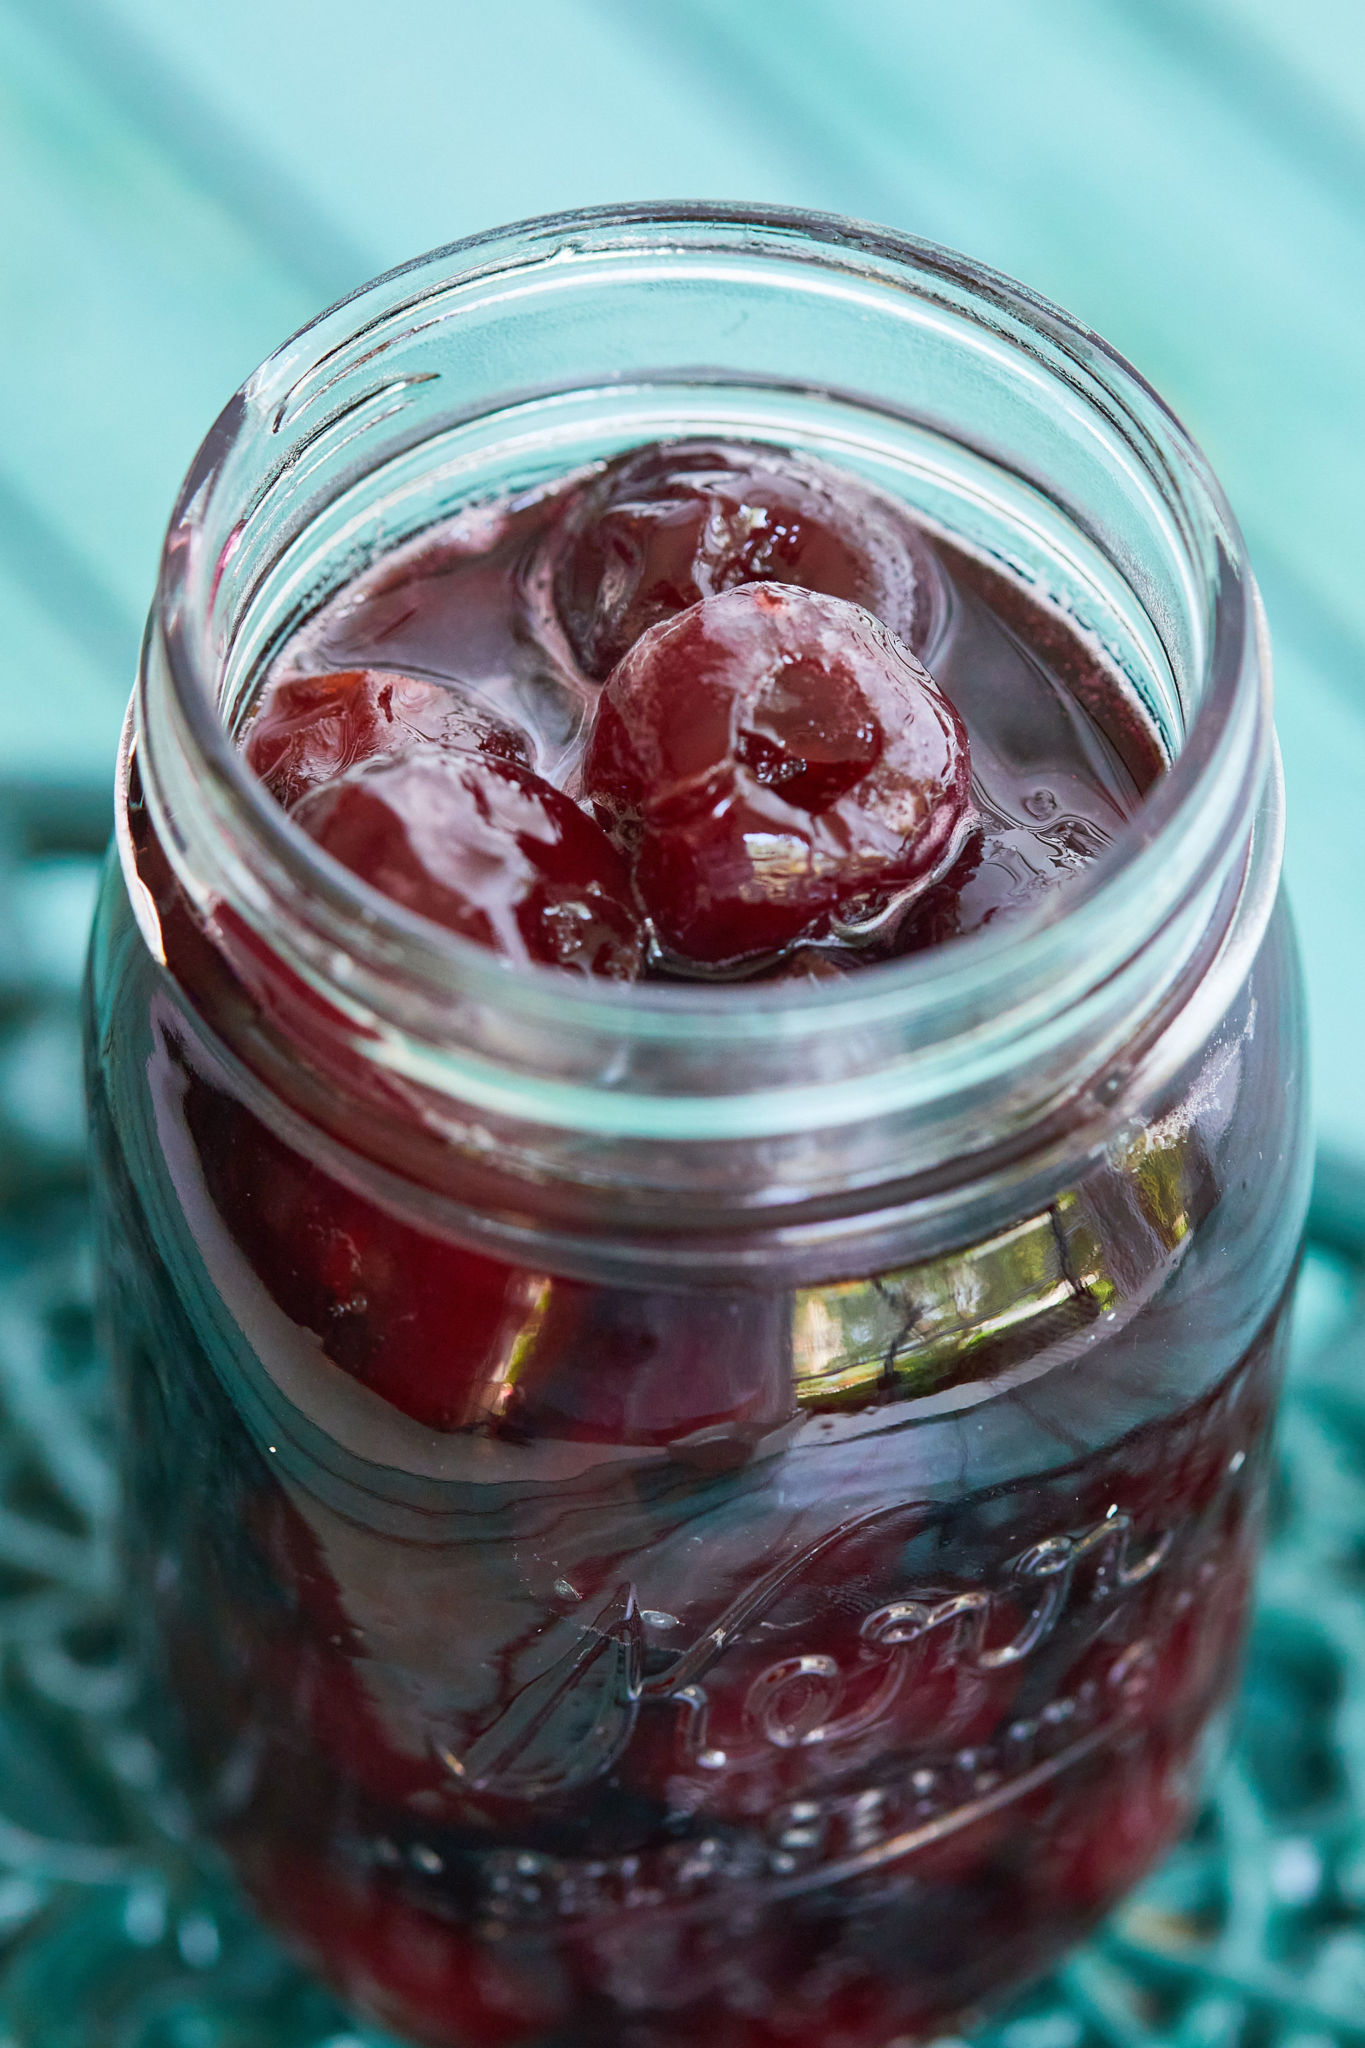 A jar of my candied cherries recipe.